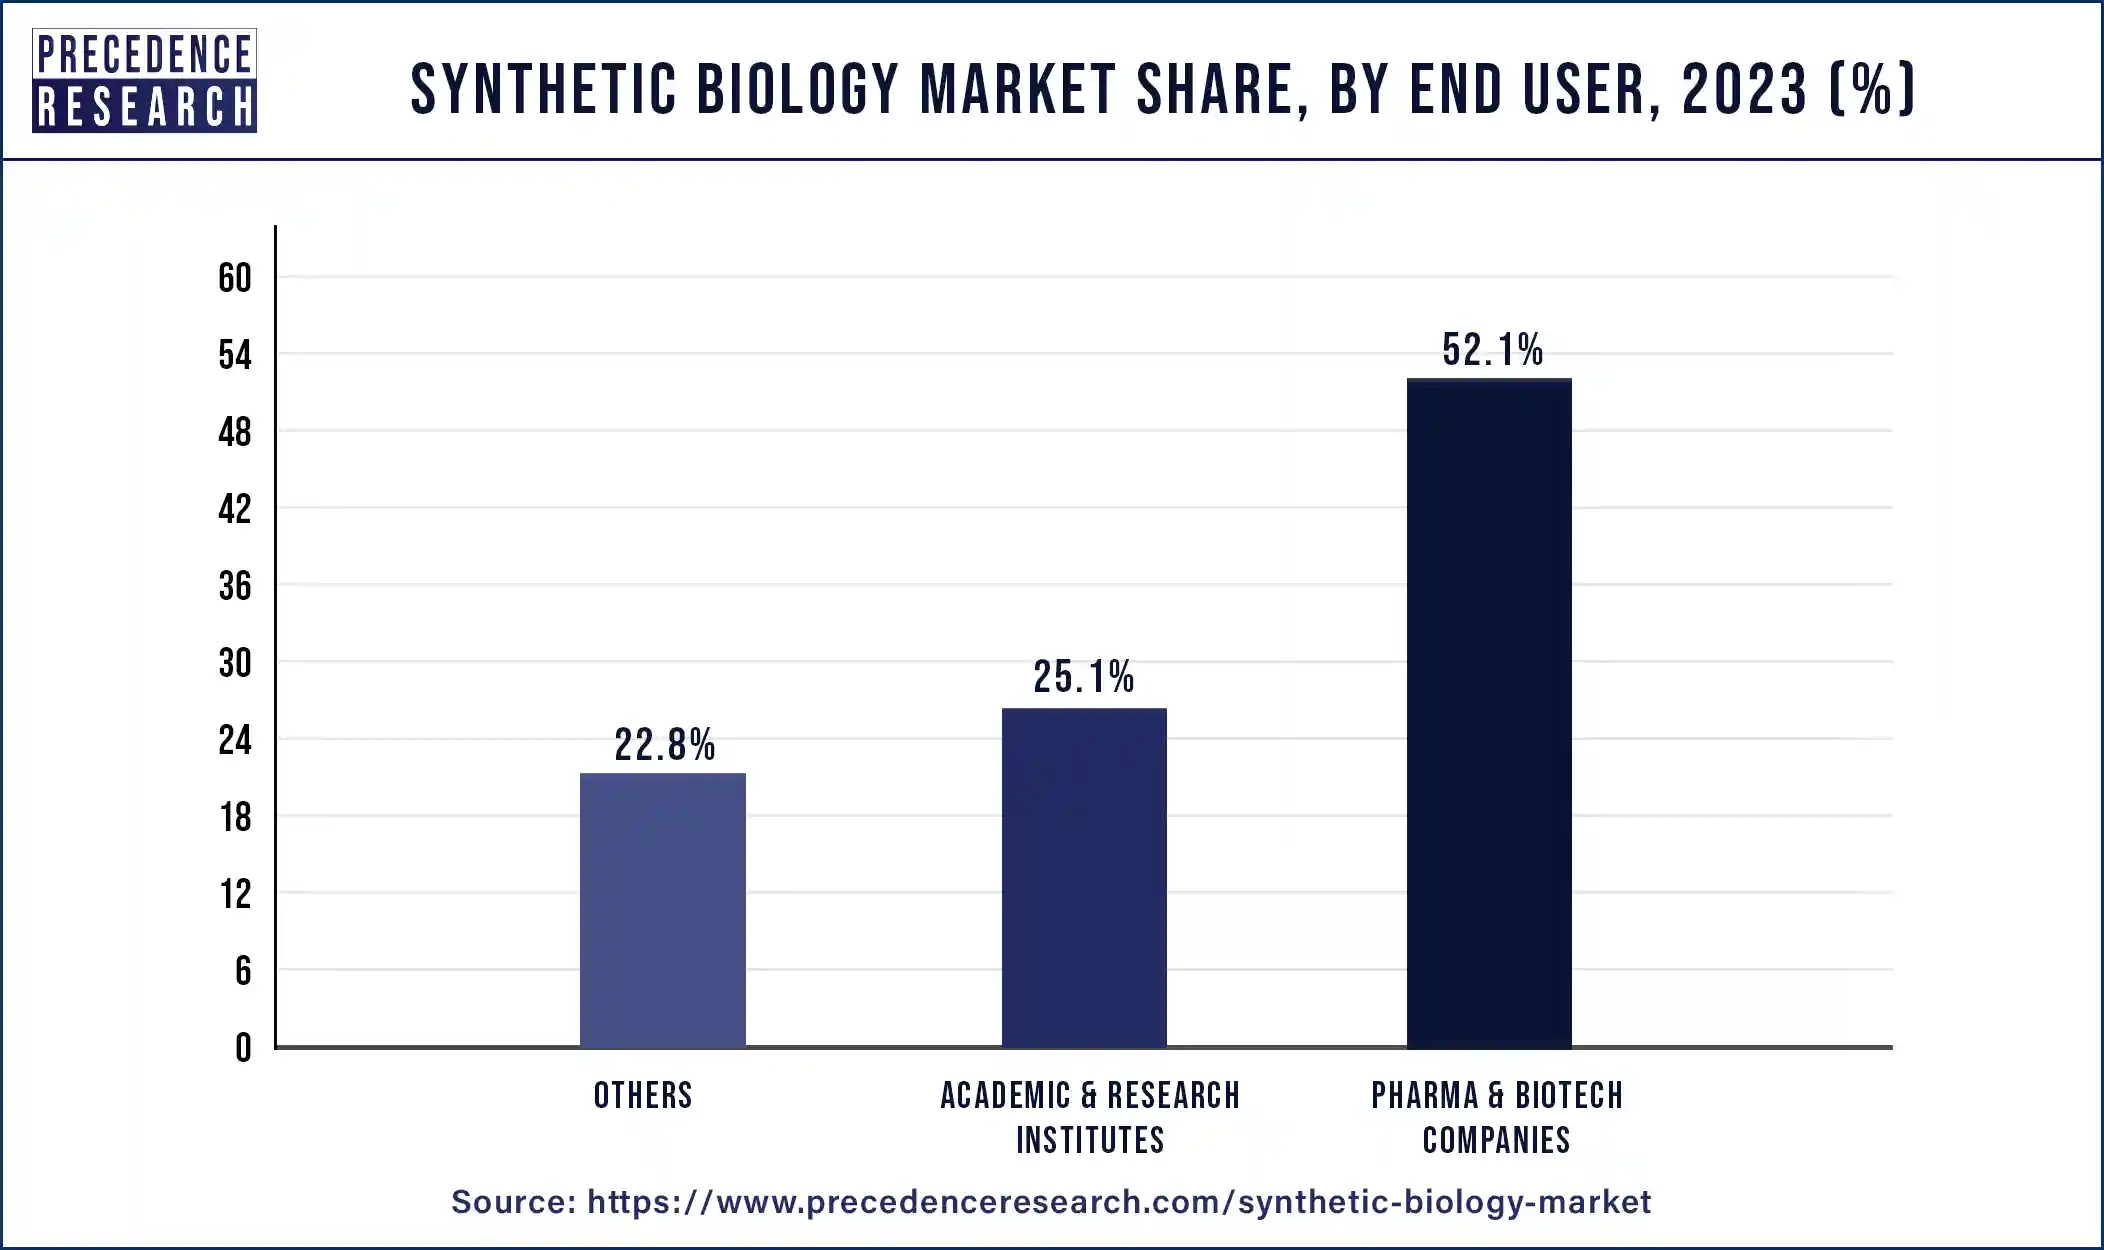 Synthetic Biology Market Share, By End-use, 2022 (%)